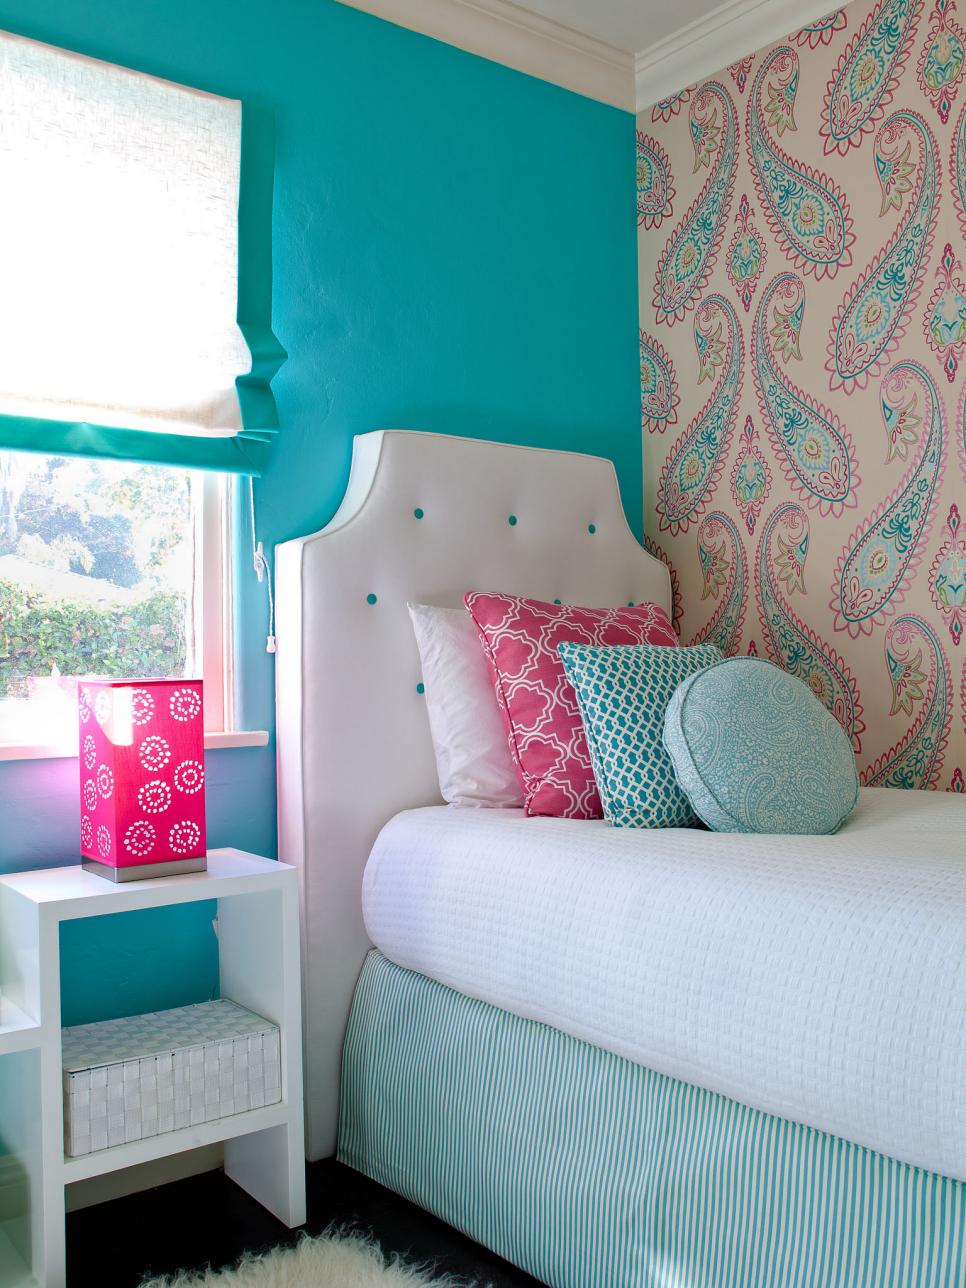 Bedroom With Aqua Walls and a White Headboard